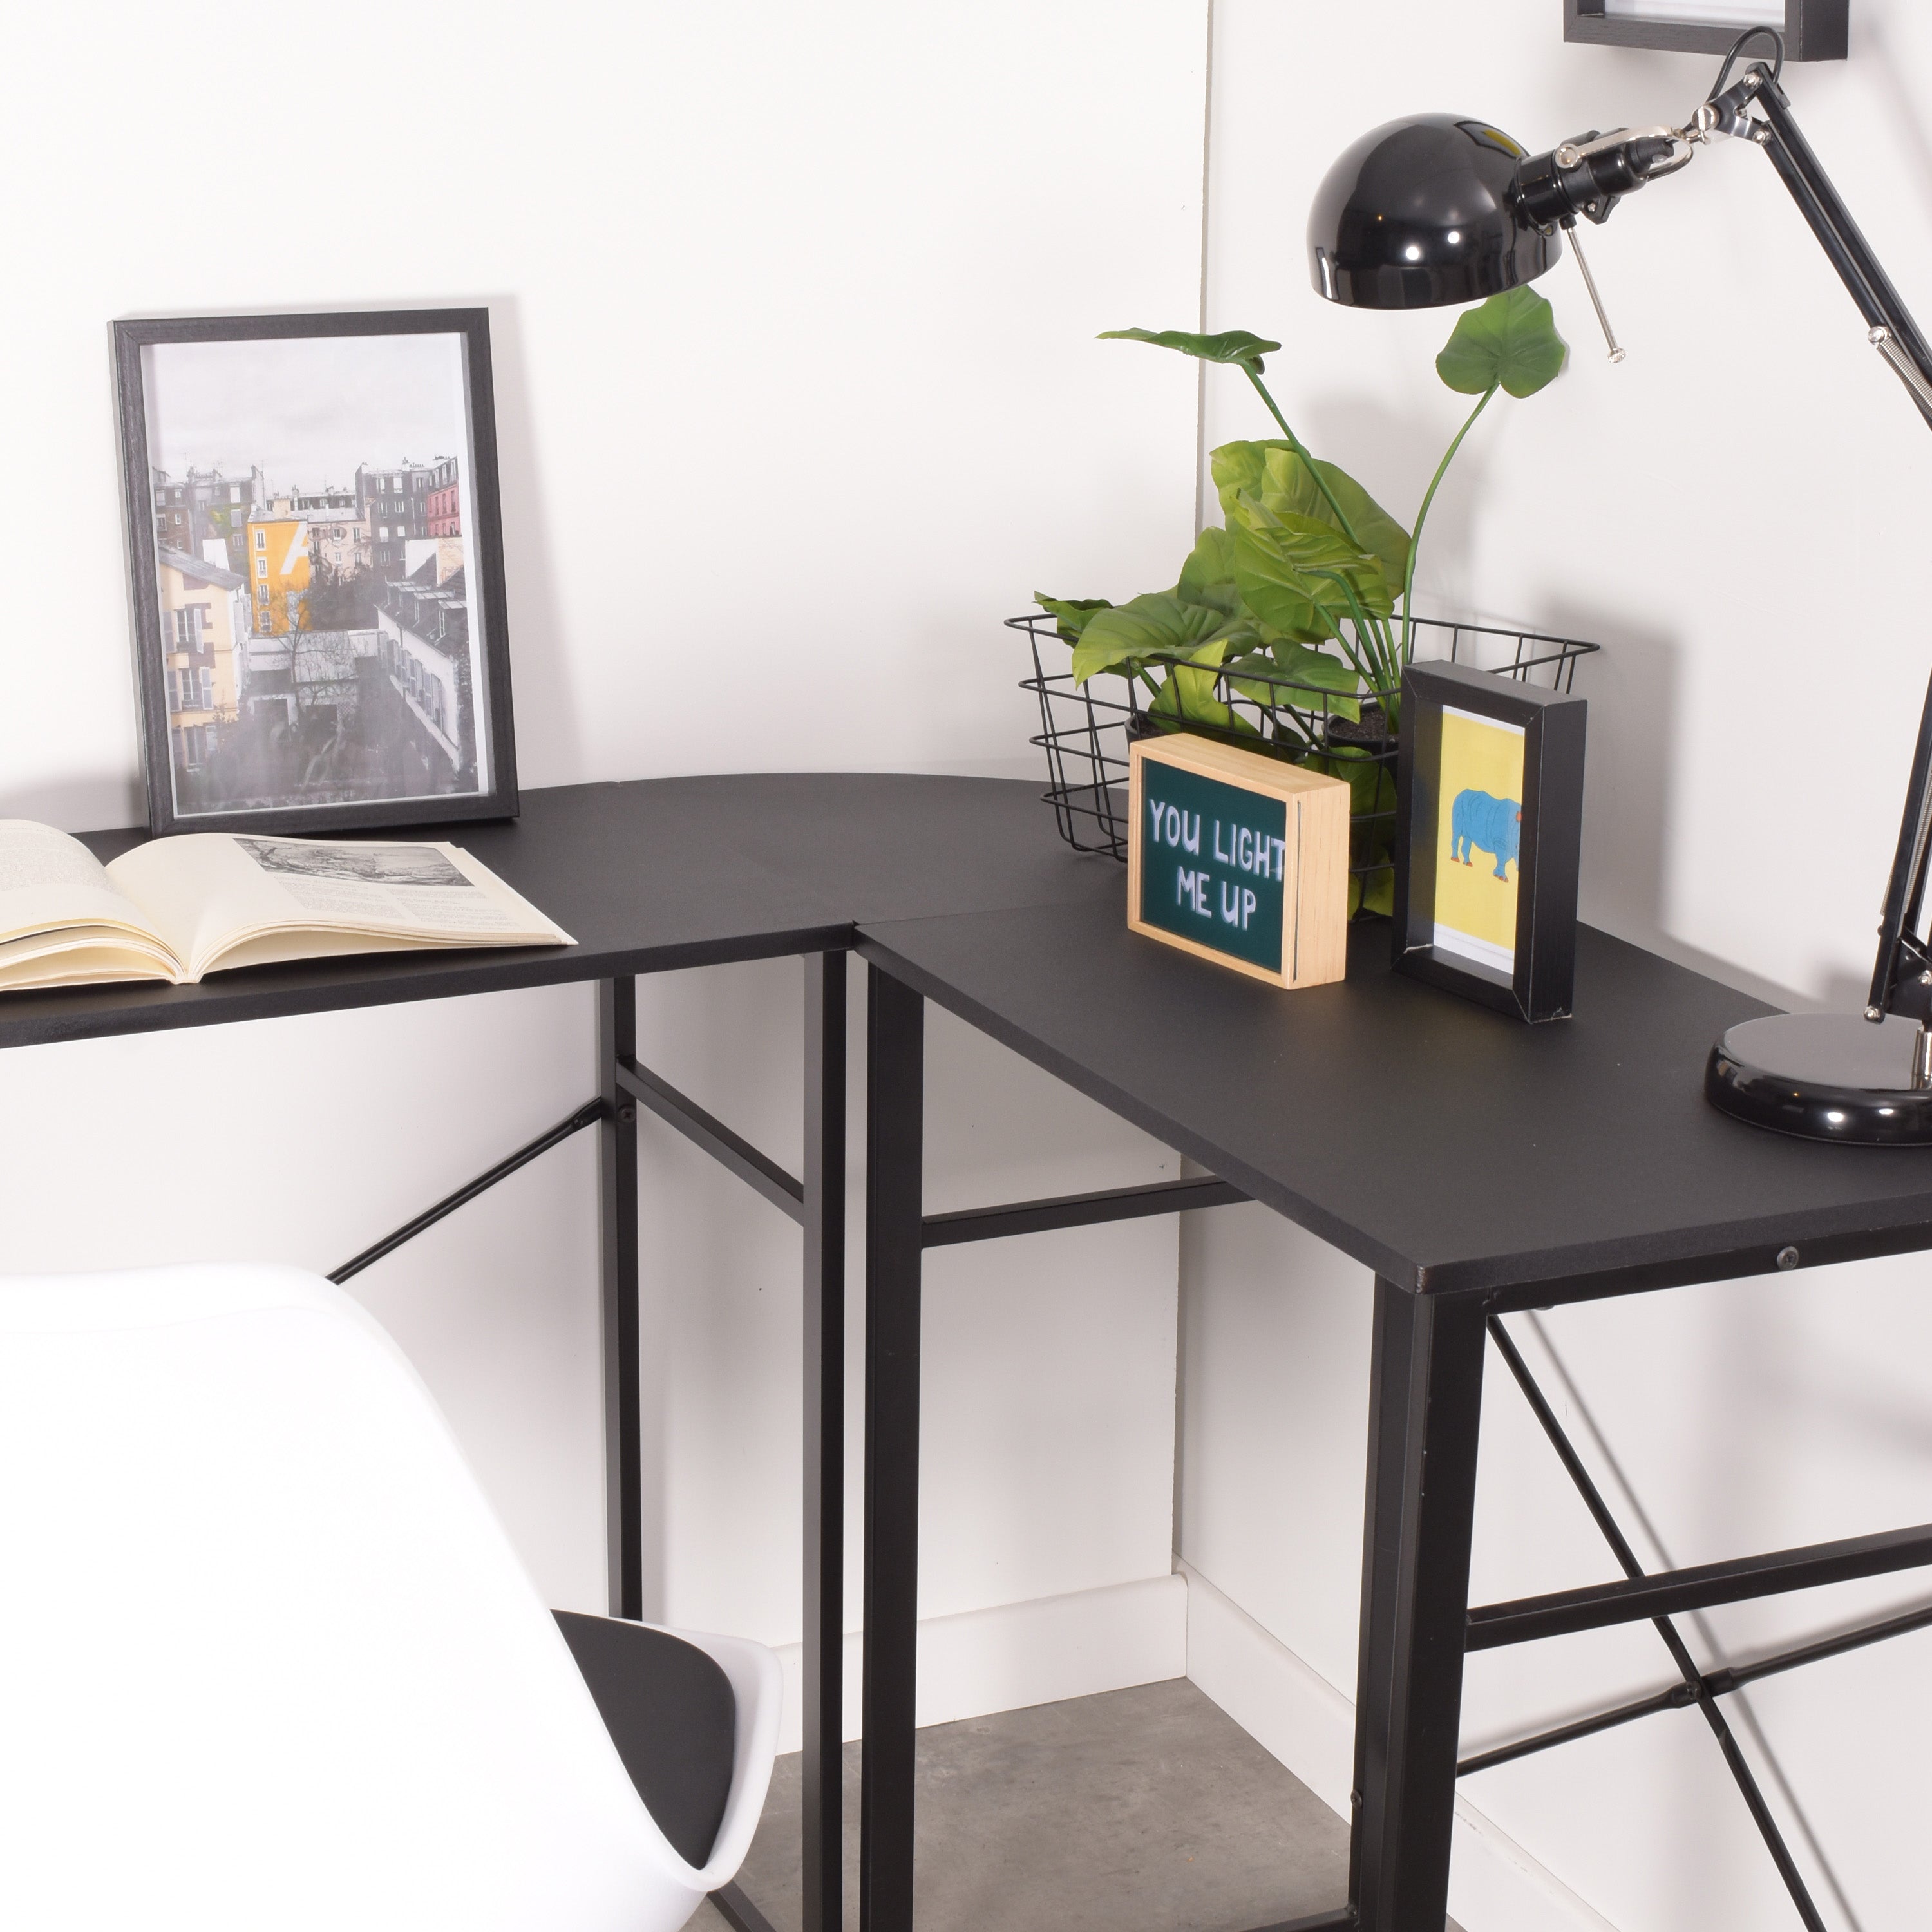 Corner desk in wood and black metal with integrated computer/pc shelf - BELSON BK